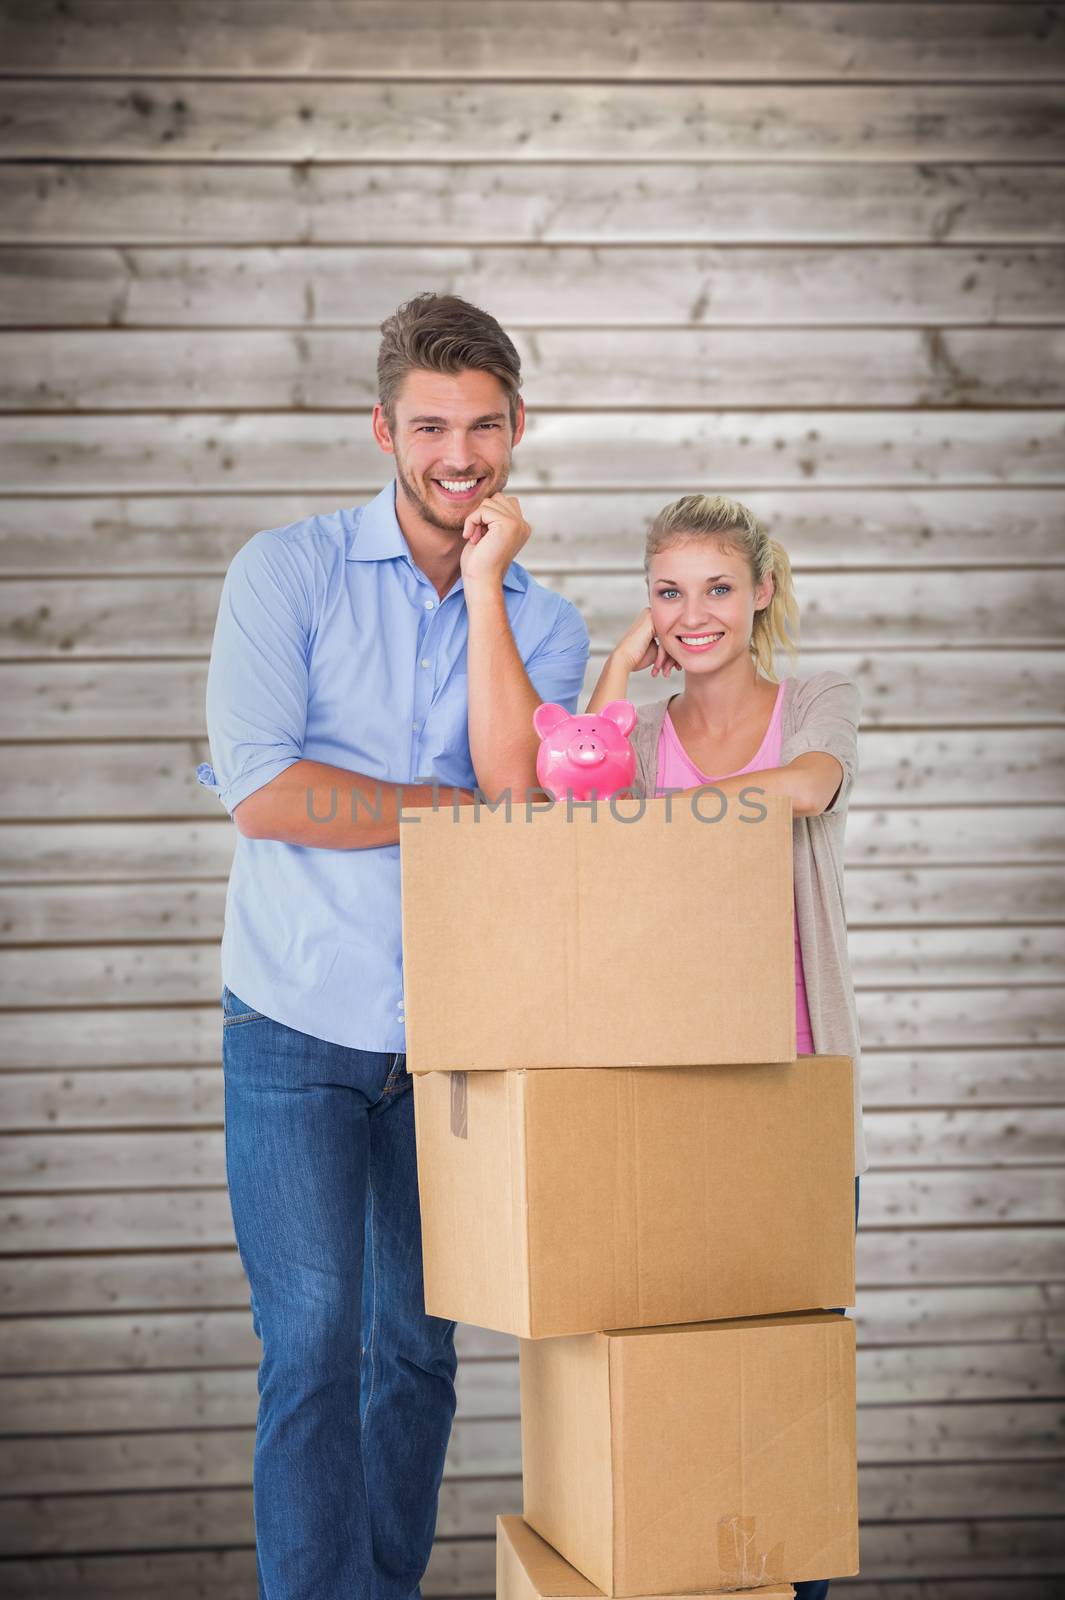 Attractive young couple leaning on boxes with piggy bank against wooden planks background